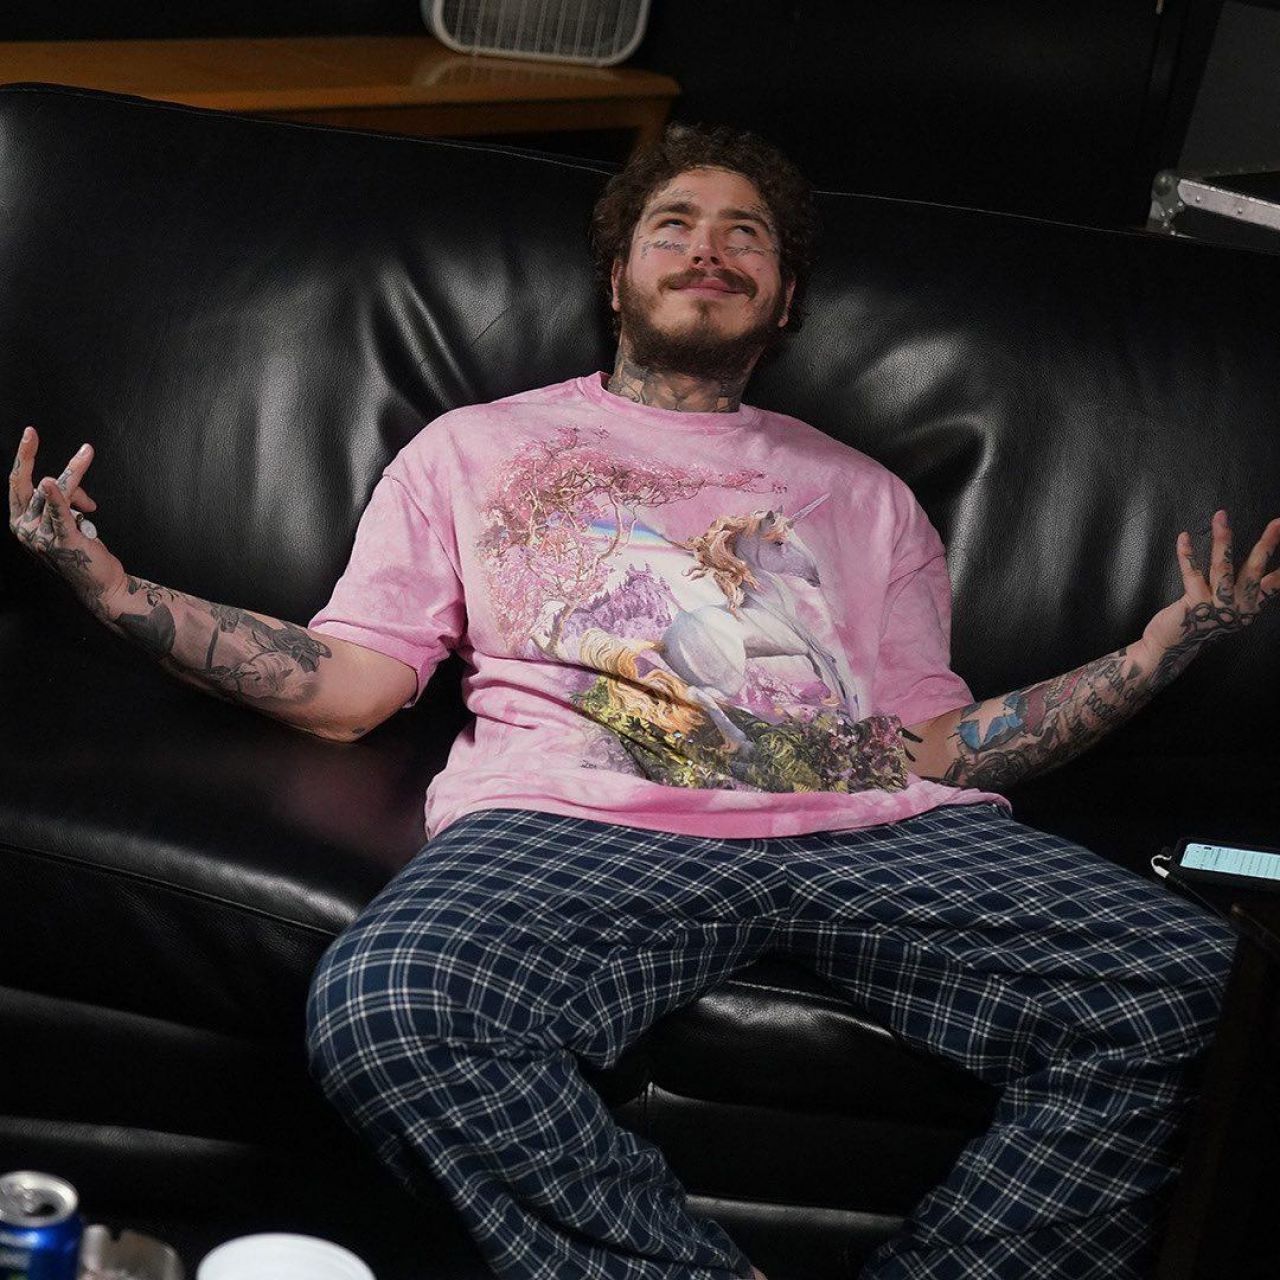 The Mountain Awesome Unicorn T-Shirt in pink worn by Post Malone on his ...